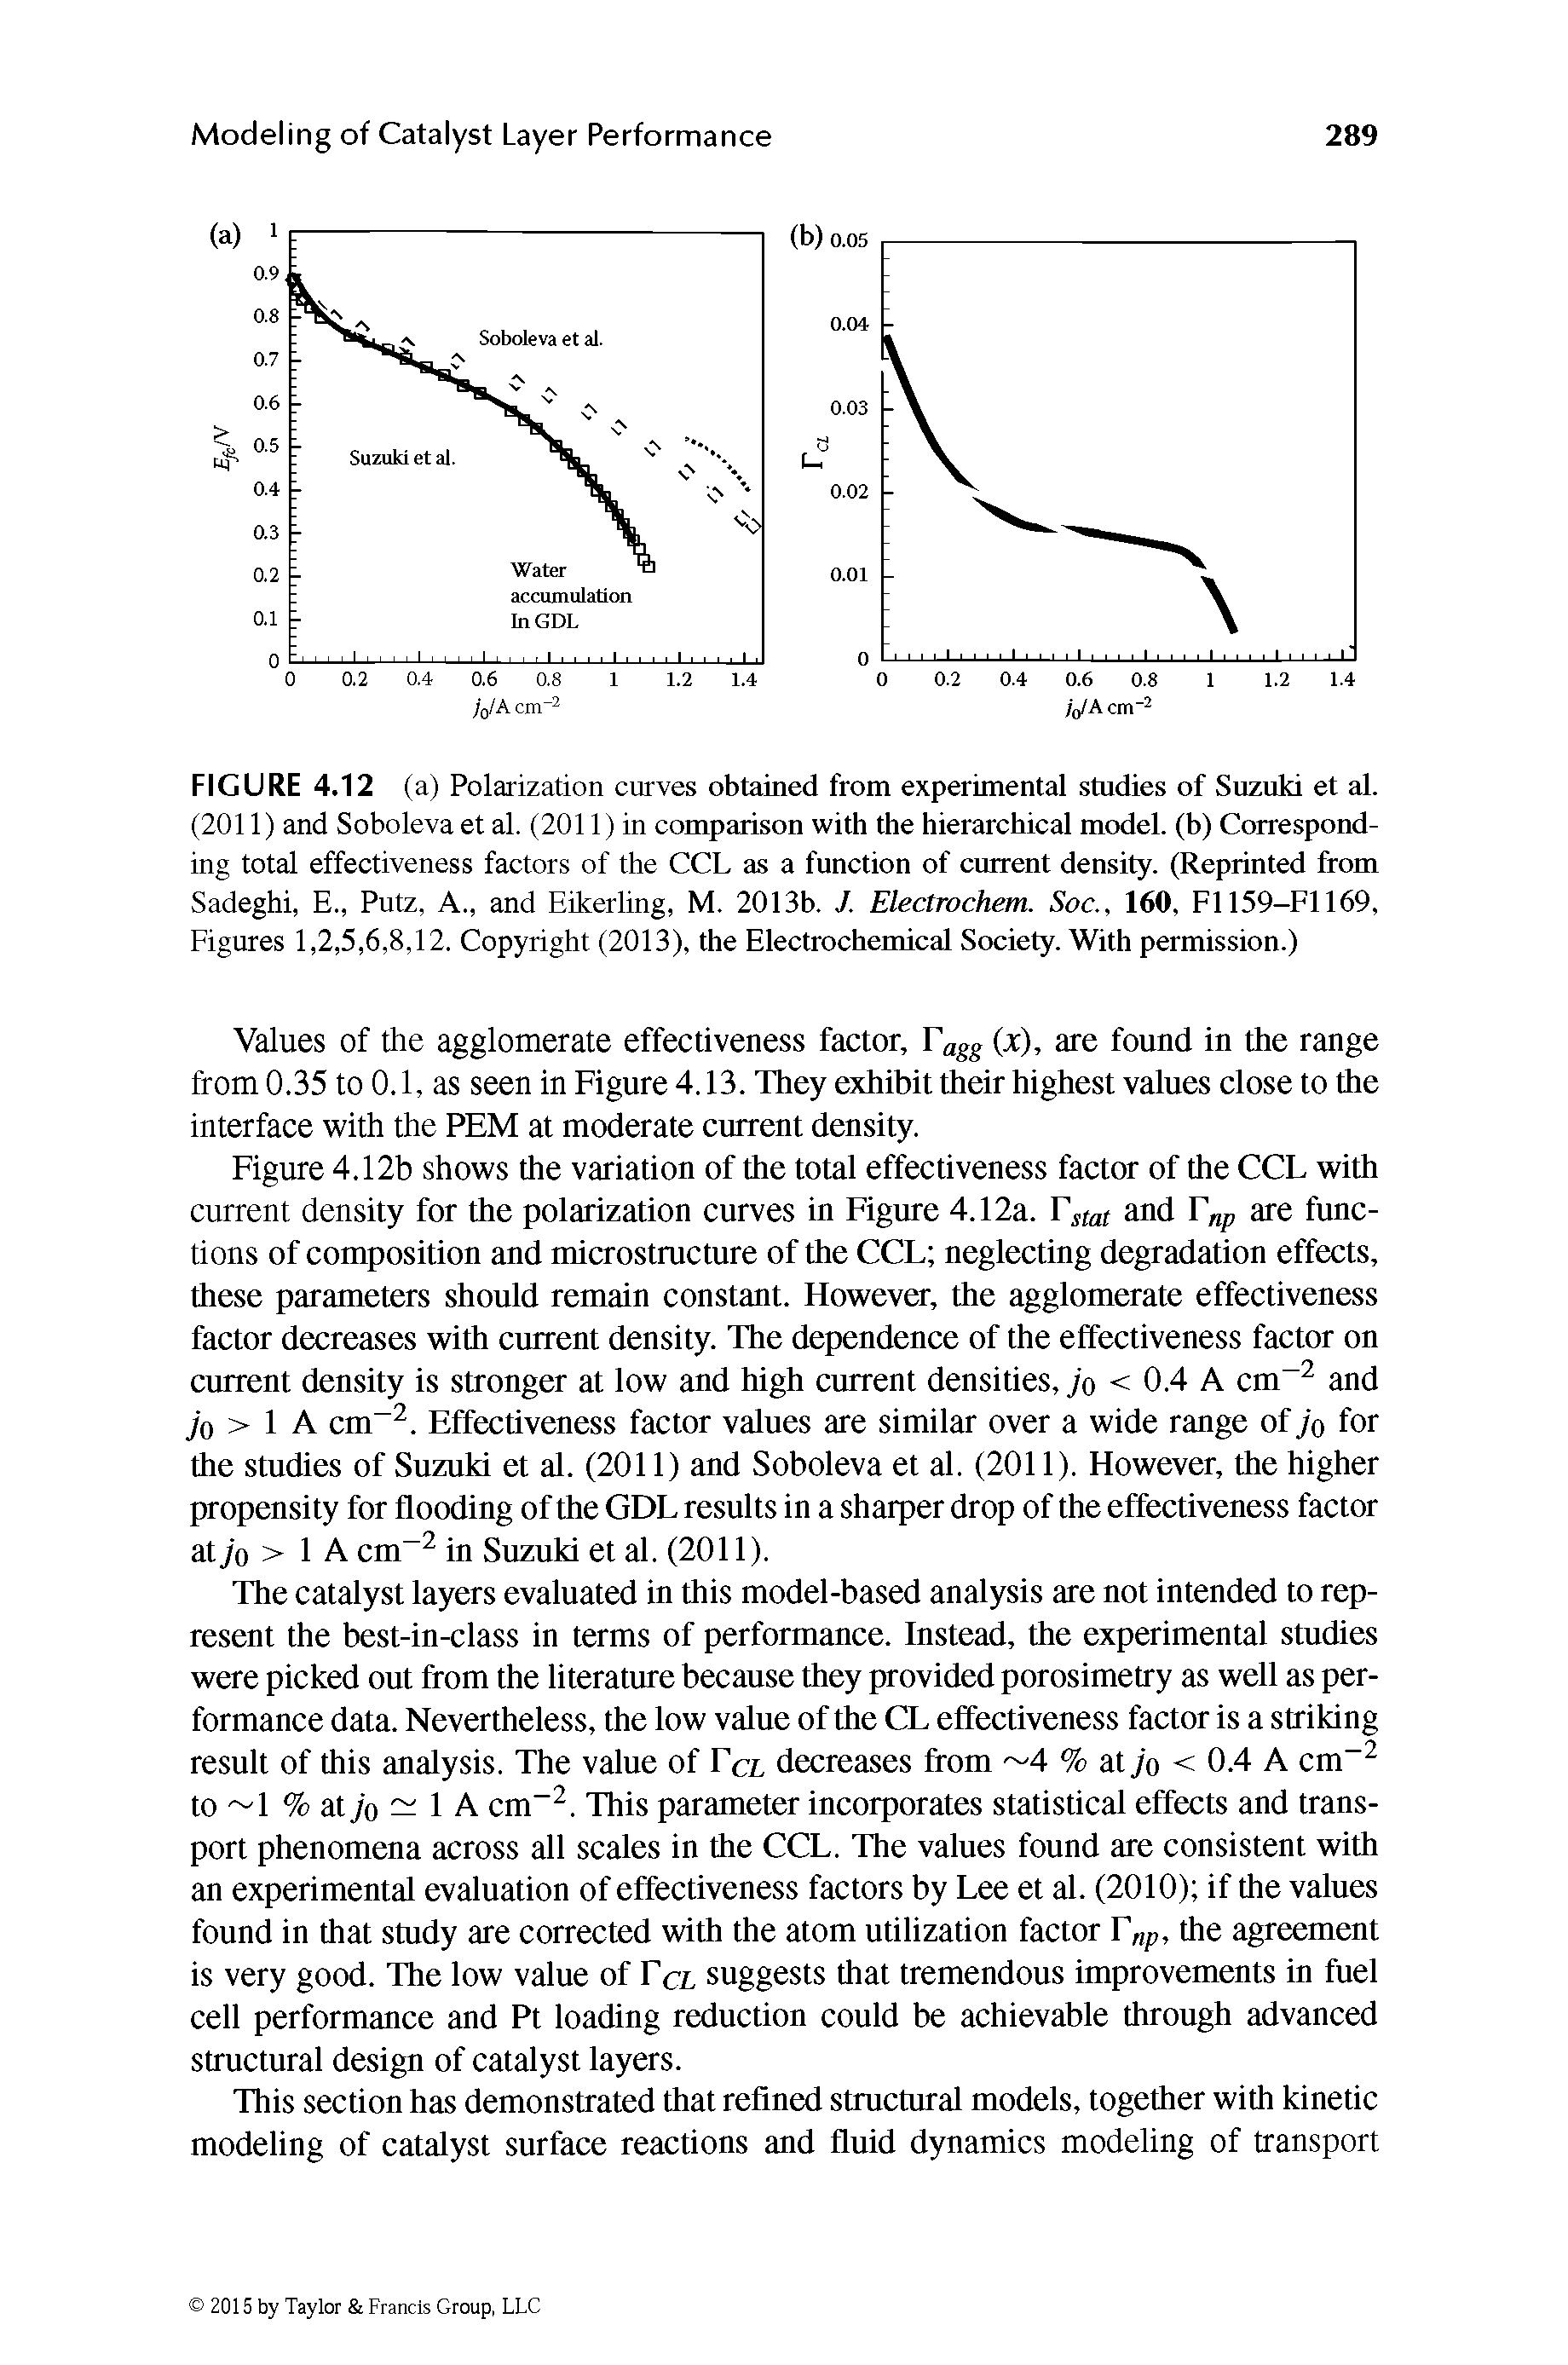 Figure 4.12b shows the variation of the total effectiveness factor of the CCL with current density for the polarization curves in Figure 4.12a. Fstat and F p are functions of composition and microstructure of the CCL neglecting degradation effects, these parameters should remain constant. However, the agglomerate effectiveness factor decreases with current density. The dependence of the effectiveness factor on current density is stronger at low and high current densities, jo < 0.4 A cm and jo > I A cm . Effectiveness factor values are similar over a wide range of jo for the studies of Suzuki et al. (2011) and Soboleva et al. (2011). However, the higher propensity for flooding of the GDL results in a sharper drop of the effectiveness factor at jo > I A cm in Suzuki et al. (2011).